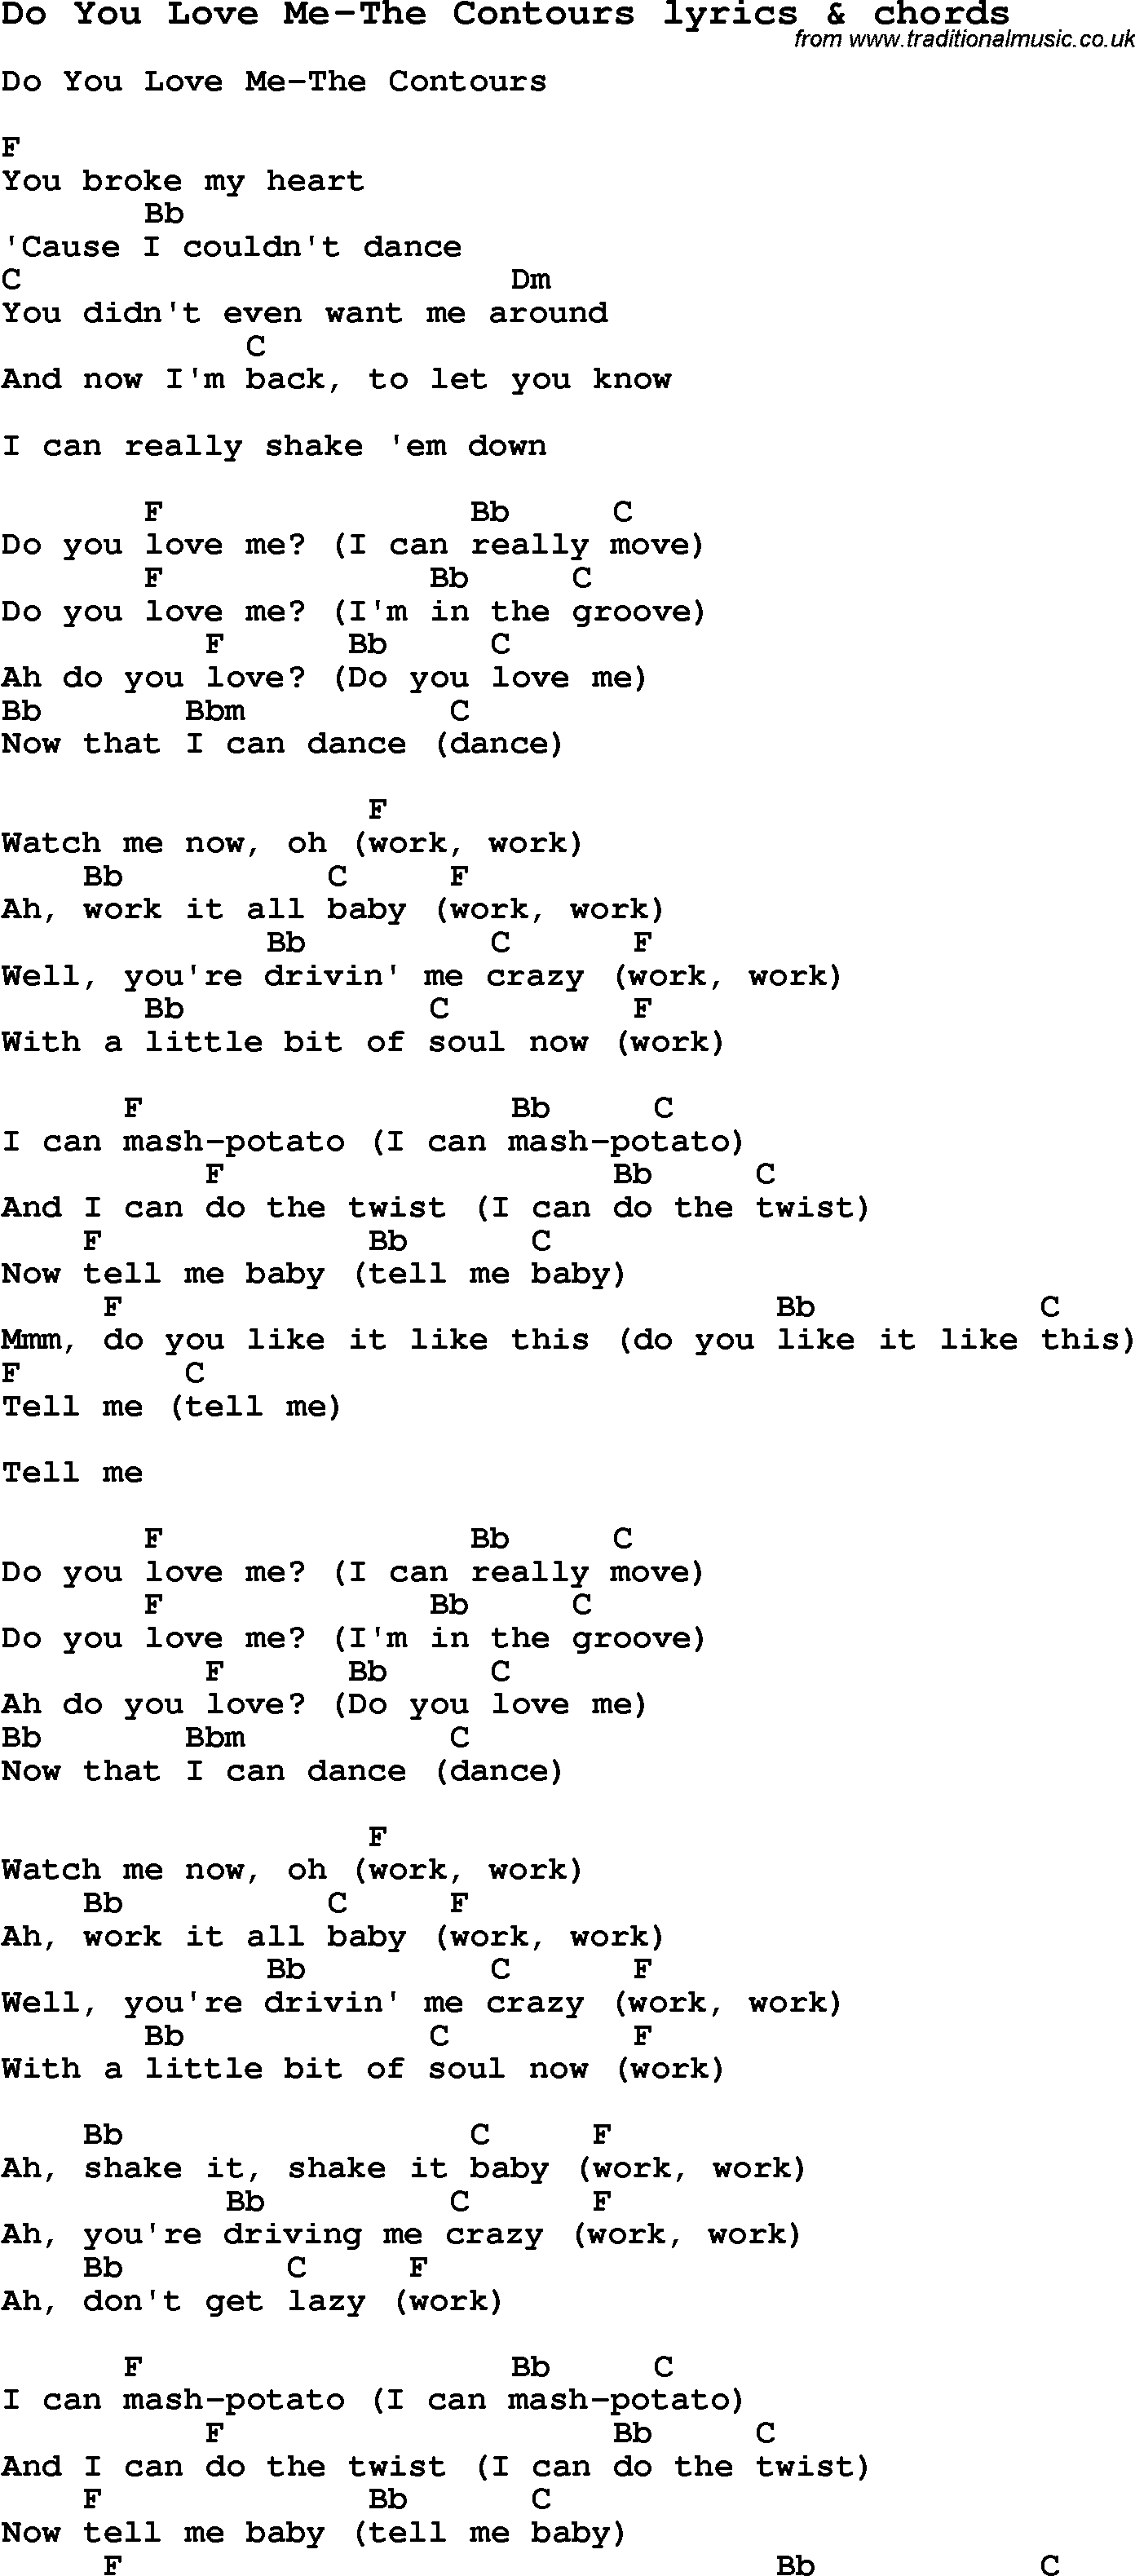 Love Song Lyrics for: Do You Love Me-The Contours with chords for Ukulele, Guitar Banjo etc.